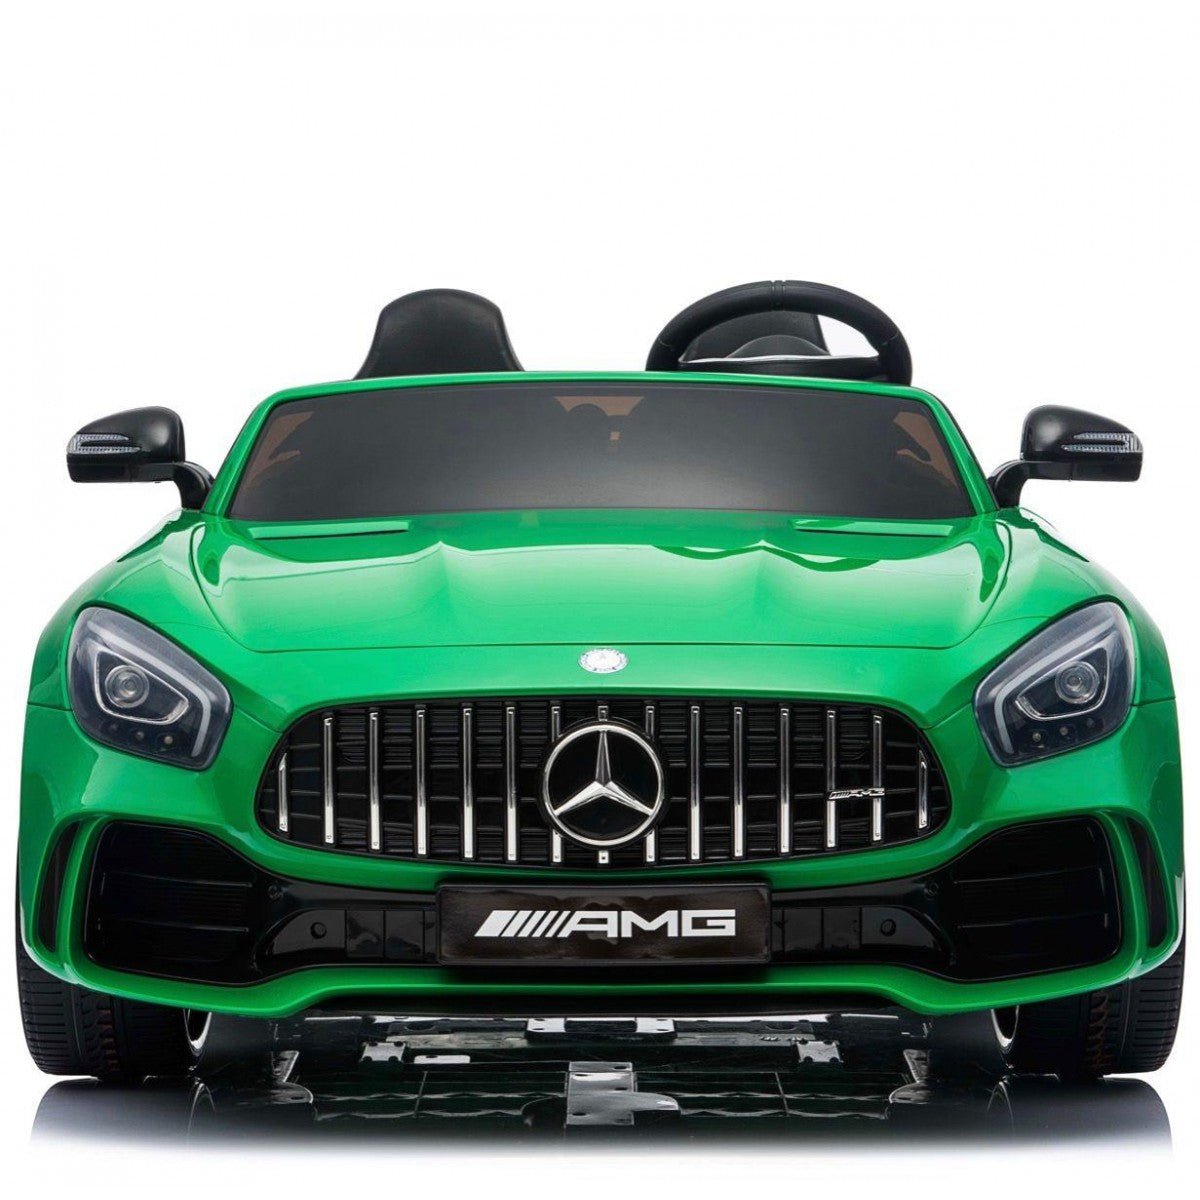 "Green Mercedes electric ride-on car for kids from Kids Car store on white background."